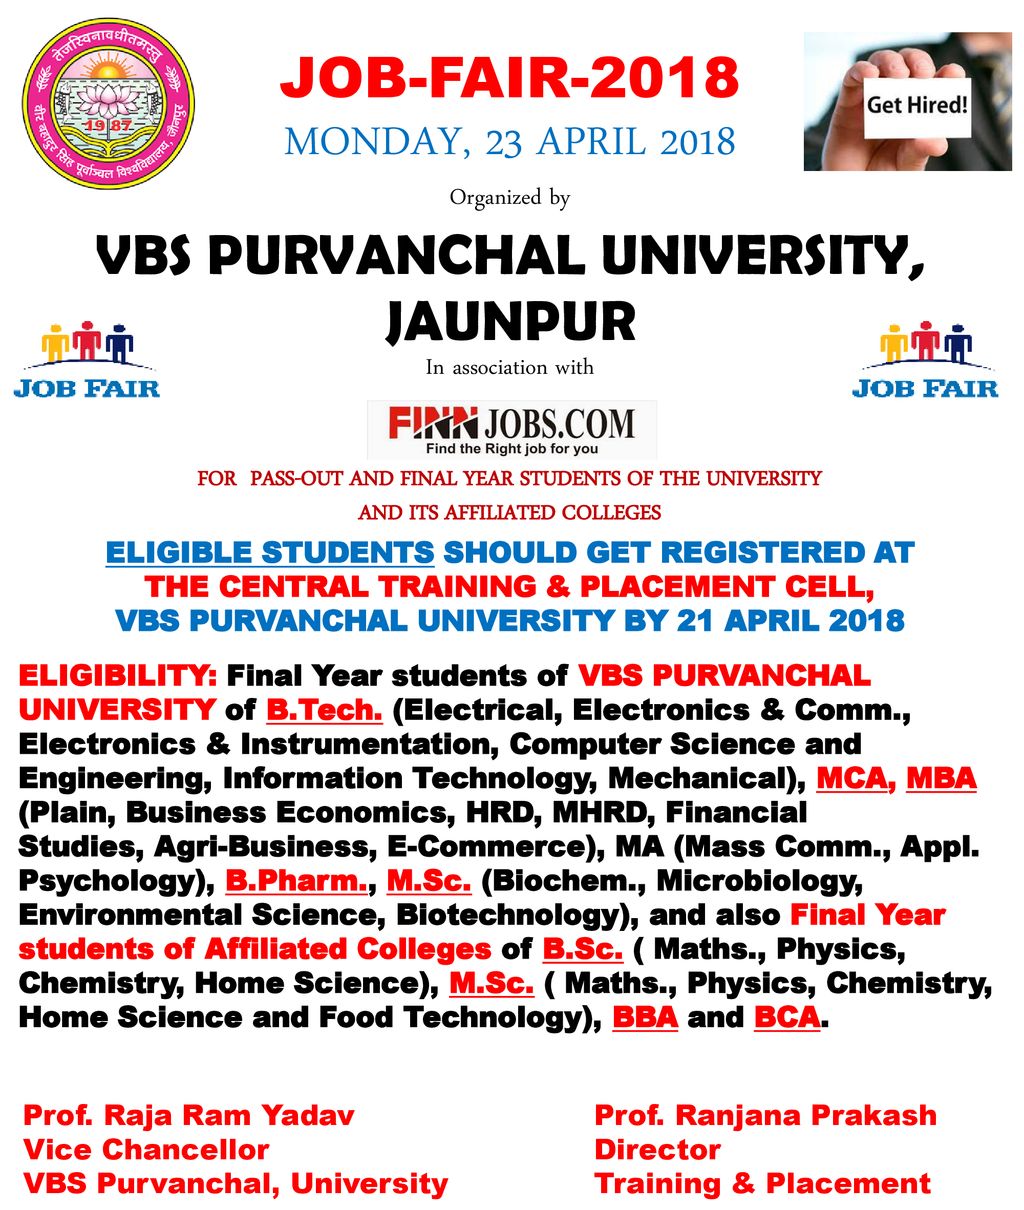 JOB-FAIR-2018 MONDAY, 23 APRIL 2018 Organized by VBS PURVANCHAL UNIVERSITY, JAUNPUR In association with FOR PASS-OUT AND FINAL YEAR STUDENTS OF THE UNIVERSITY AND ITS AFFILIATED COLLEGES ELIGIBLE STUDENTS SHOULD GET REGISTERED AT THE CENTRAL TRAINING & PLACEMENT CELL, VBS PURVANCHAL UNIVERSITY BY 21 APRIL 2018